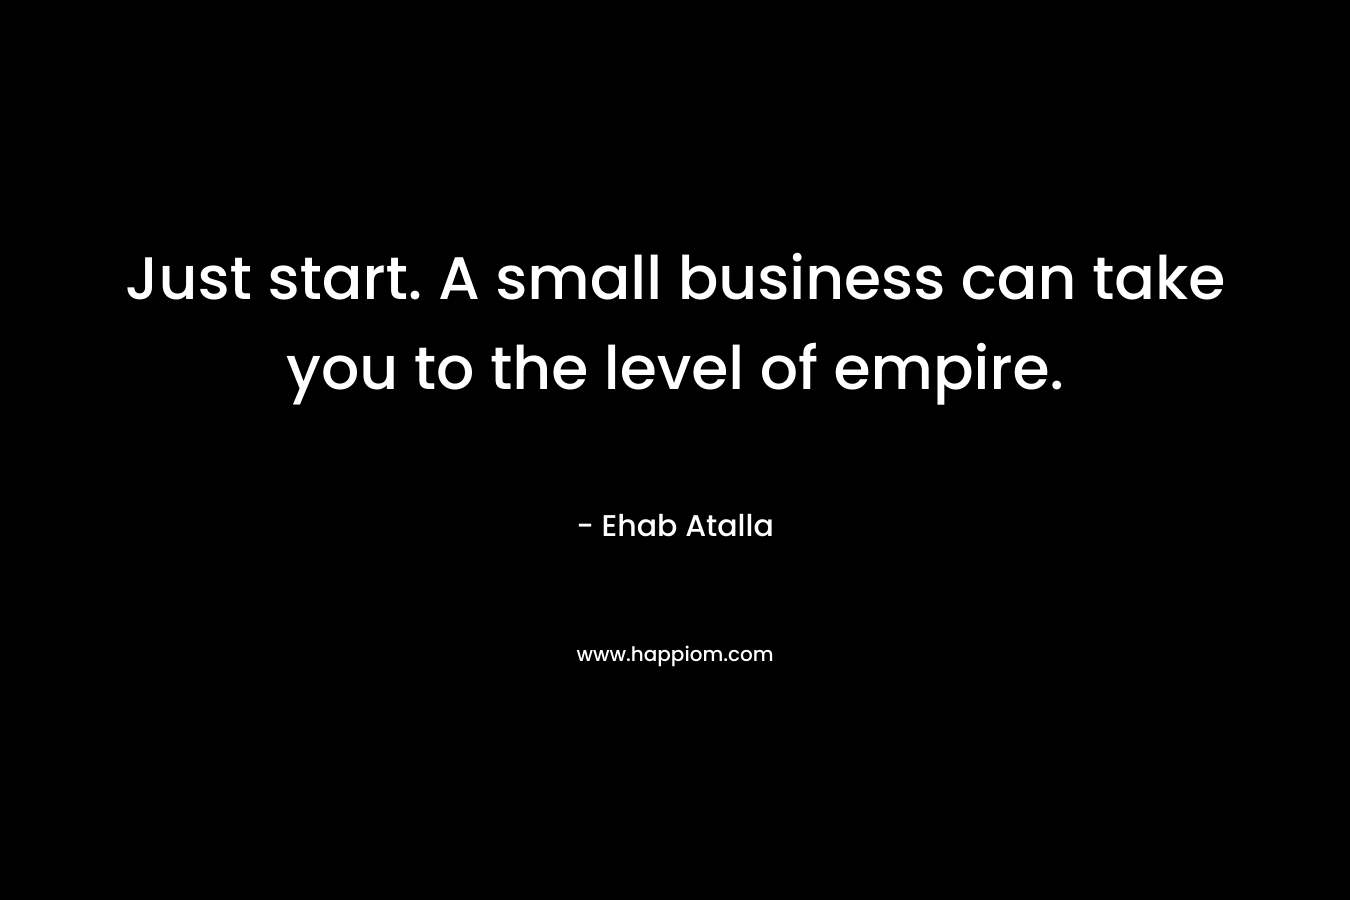 Just start. A small business can take you to the level of empire.